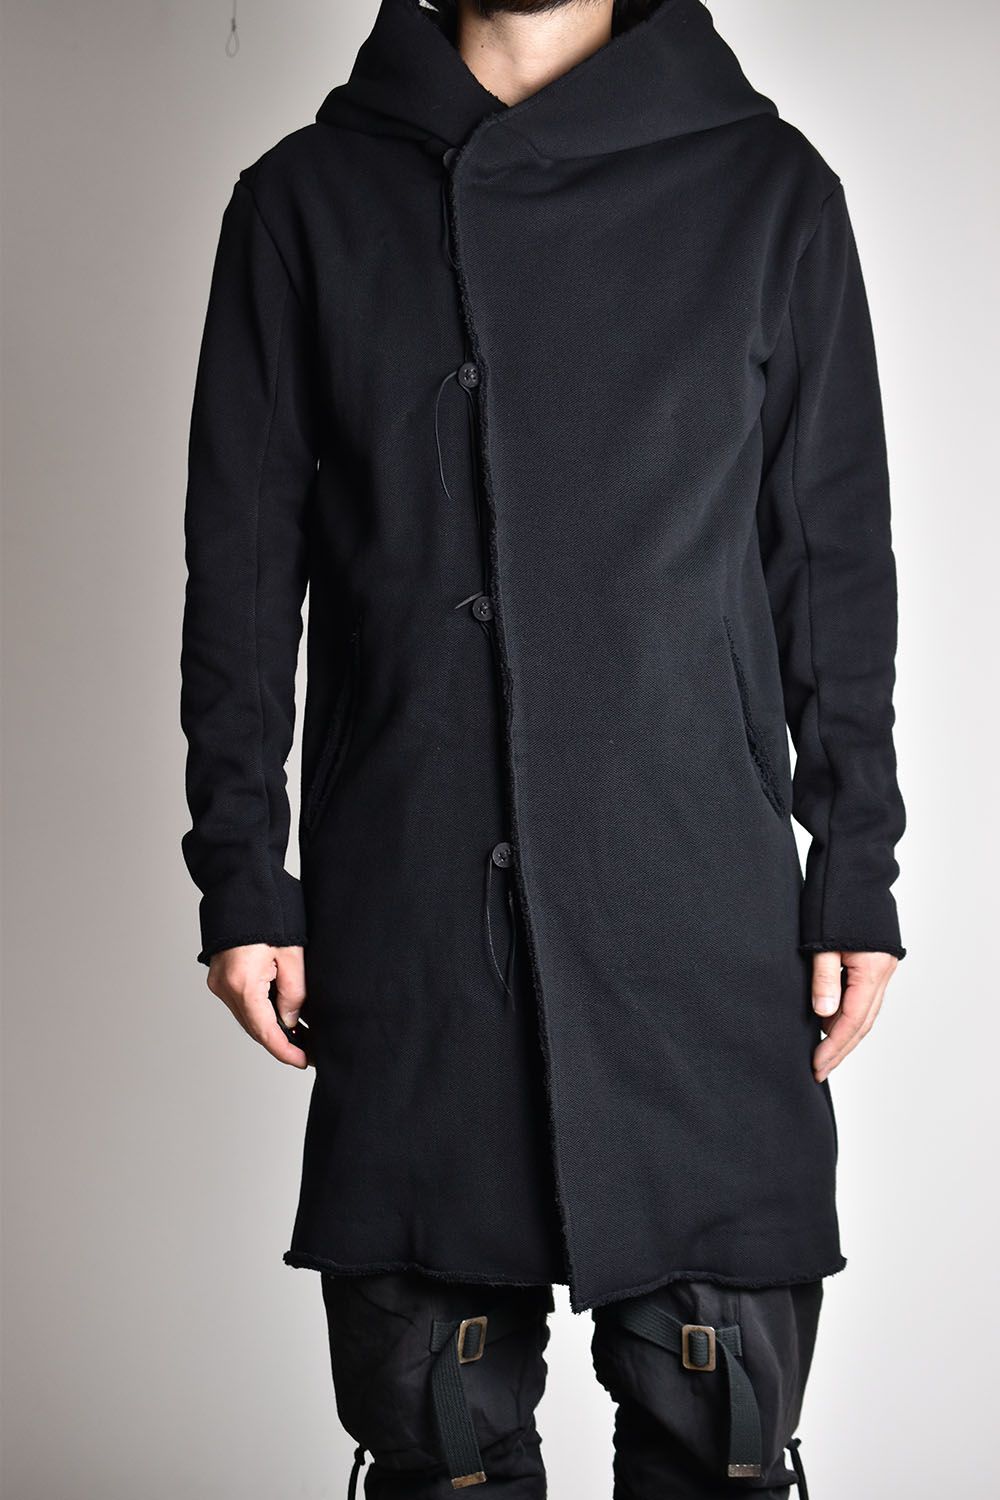 Cashmere×Wool×Cotton Hooded Long  Coat